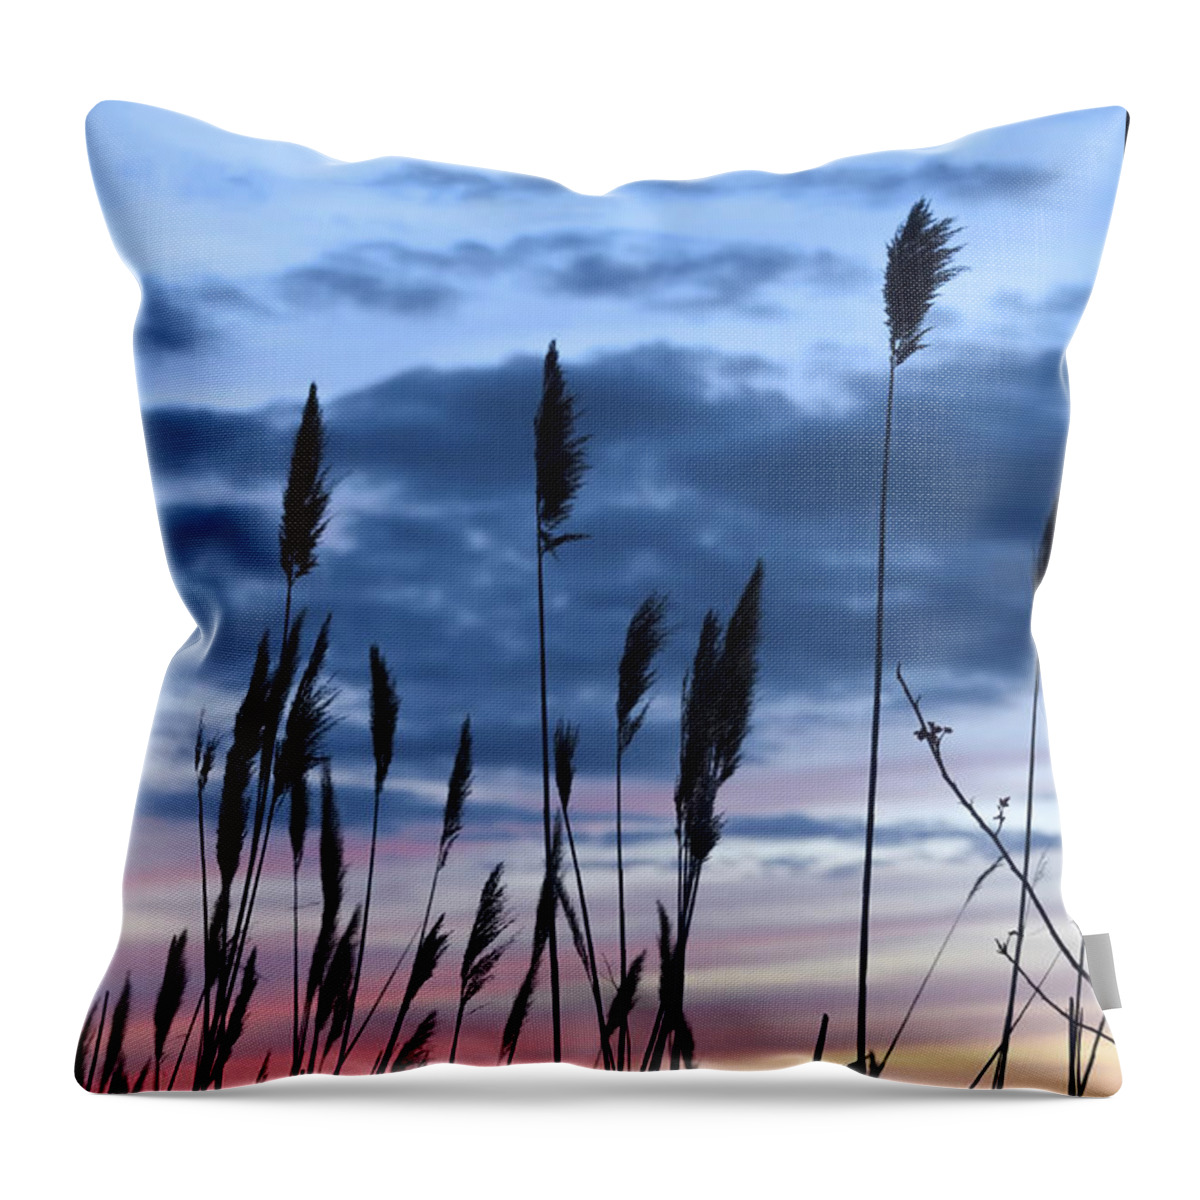 Water Throw Pillow featuring the photograph Connecticut Sunset with Reeds Series 4 by Marianne Campolongo